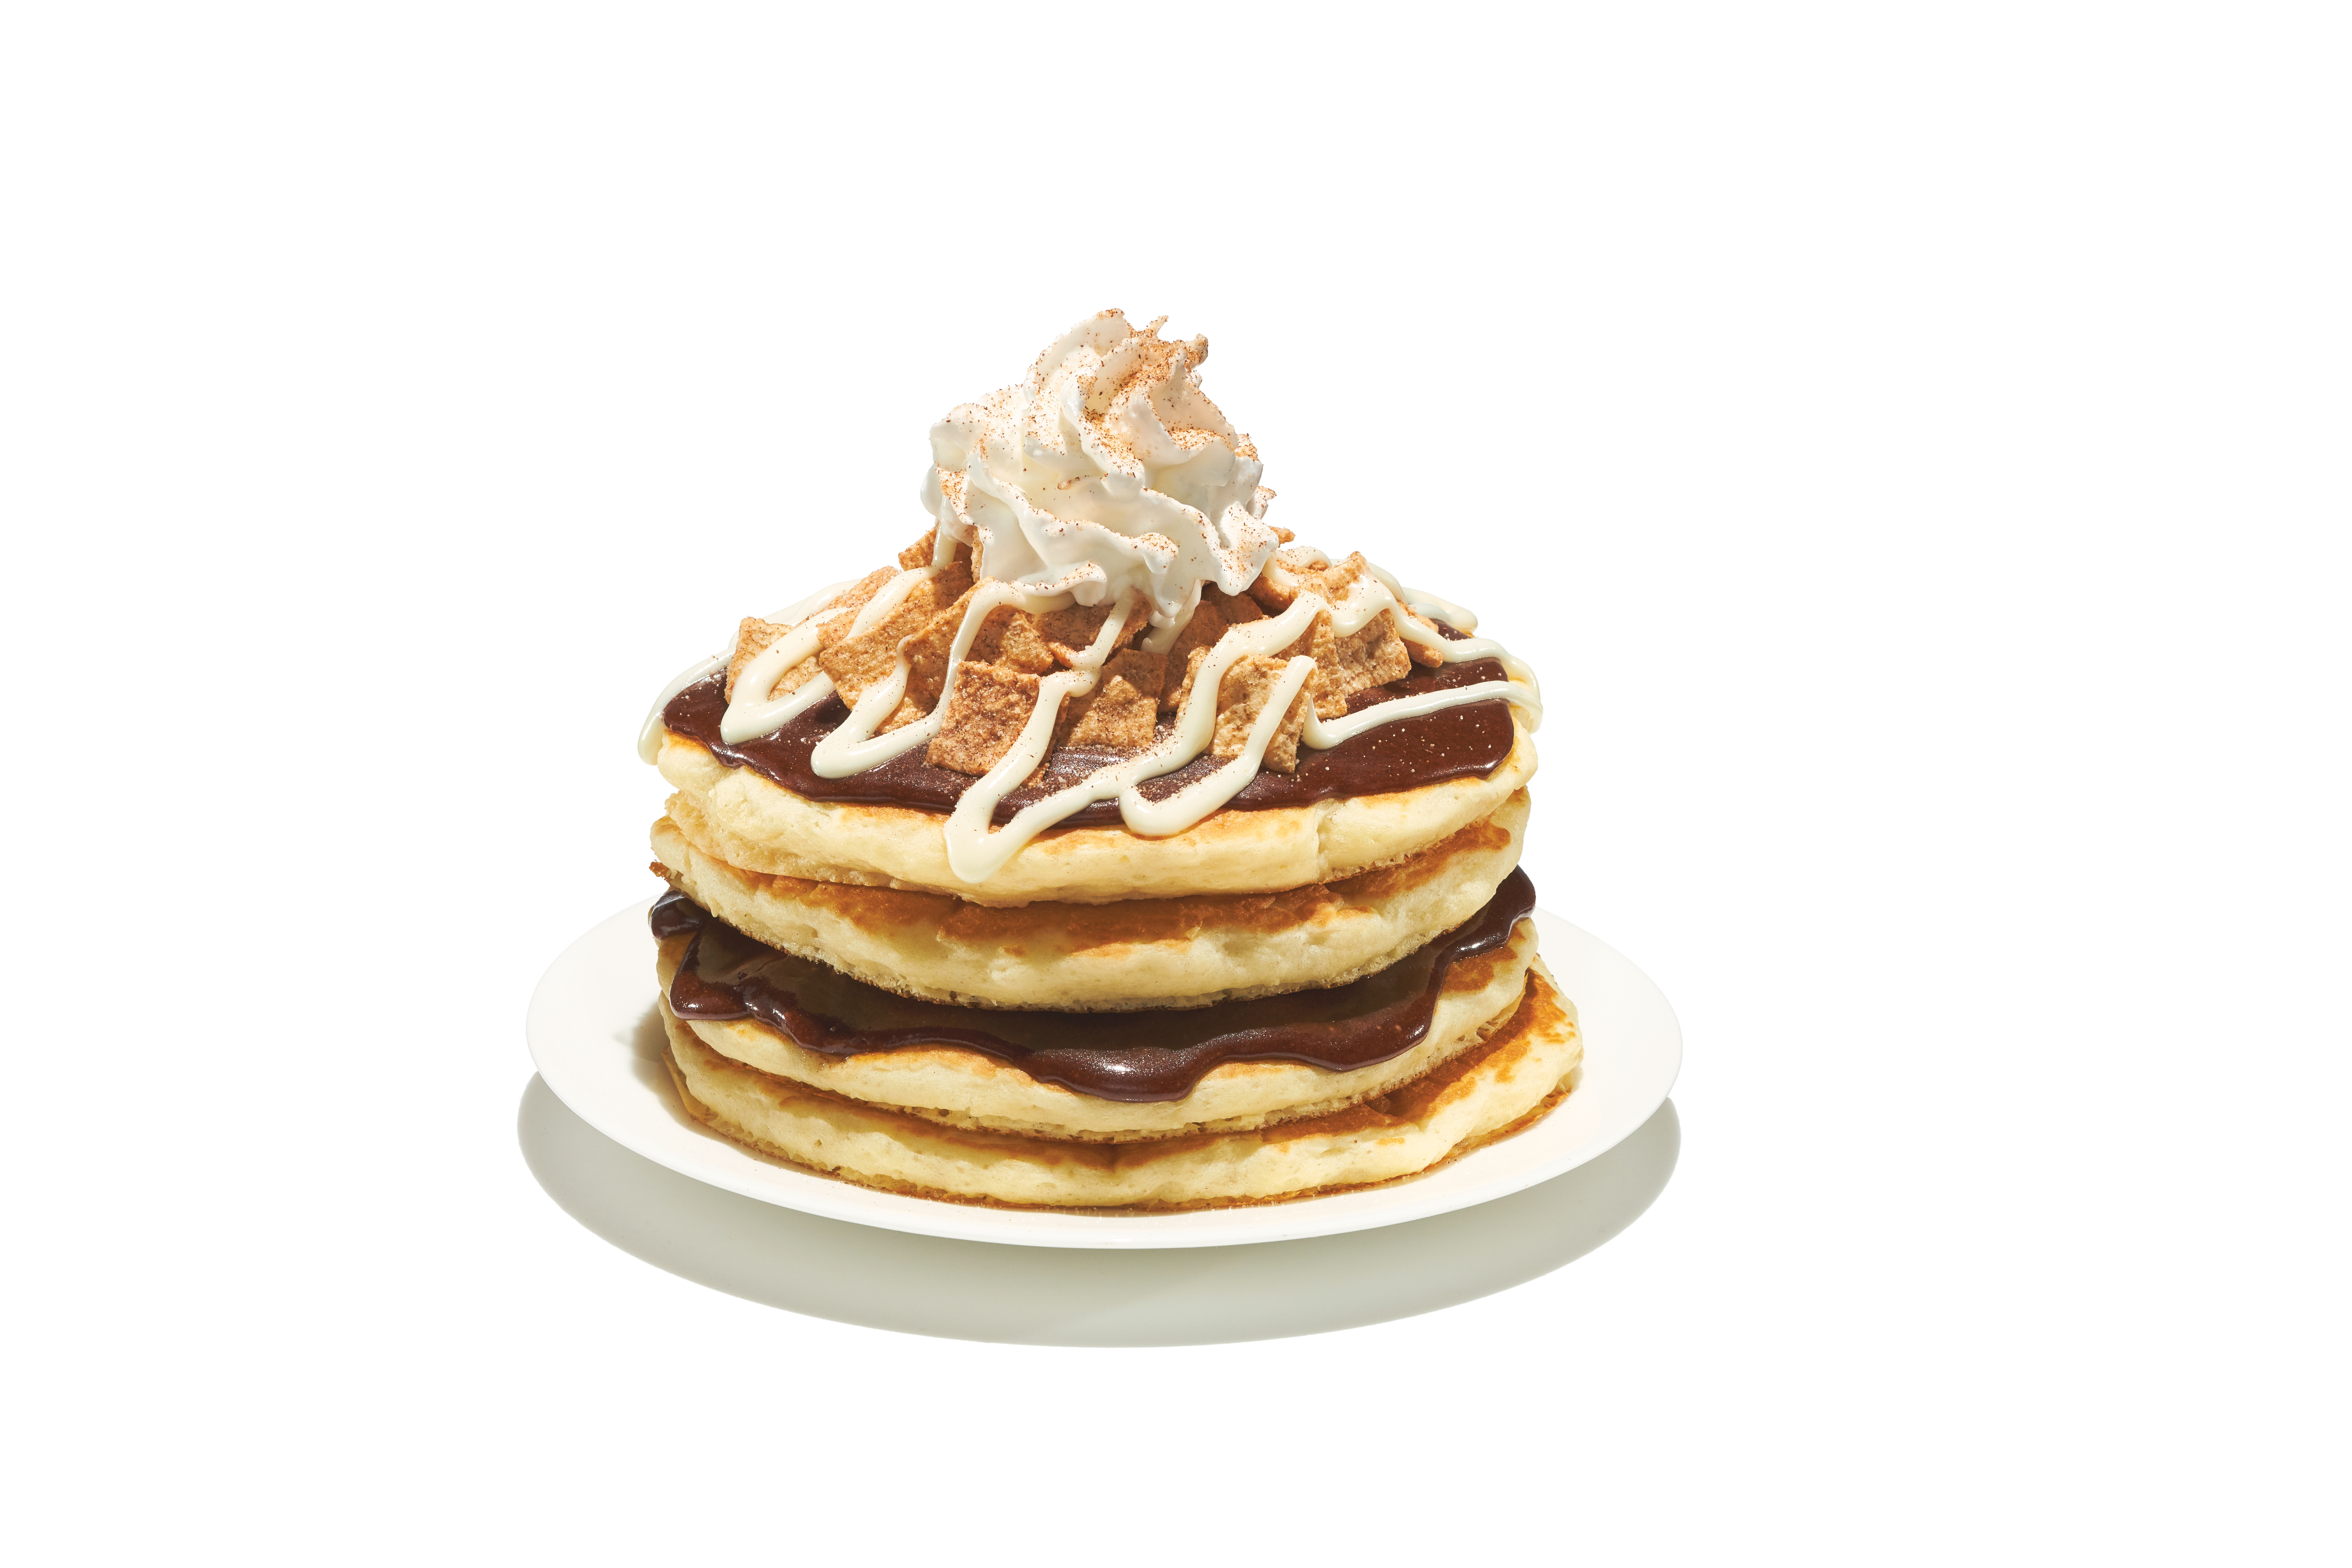 IHOP partners with PepsiCo, General Mills on new Cereal Pancakes, 2020-03-02